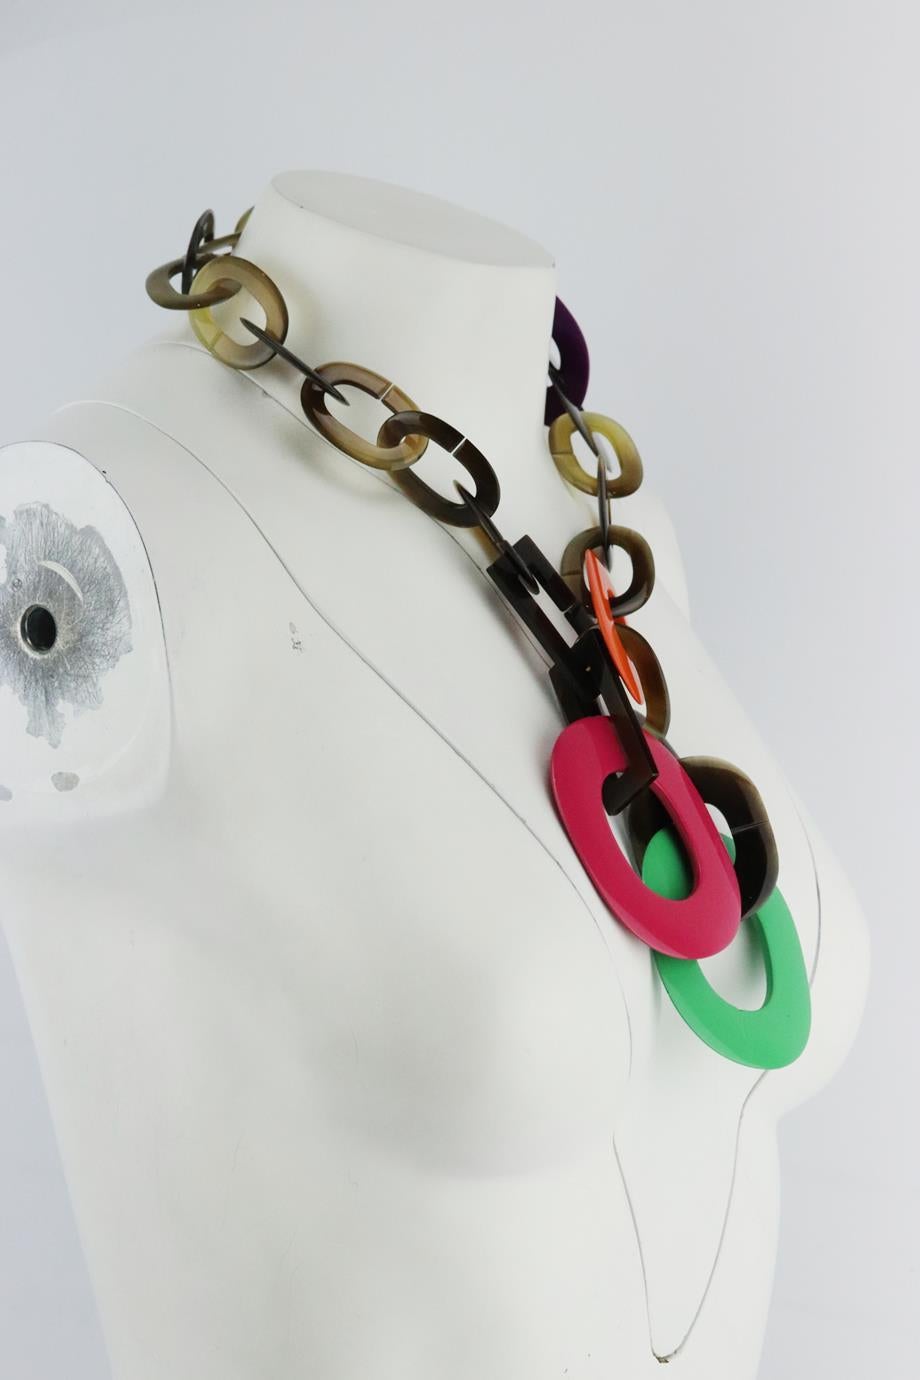 Hermès Duncan horn and lacquer lariat necklace. Made from horn and lacquer interlocking chain in differing shapes and sizes. Tonal-brown, purple, orange, green and pink. Slips on. Does not come with dustbag or box. Drop: 9.5 in. Pendant Drop: 5 in.